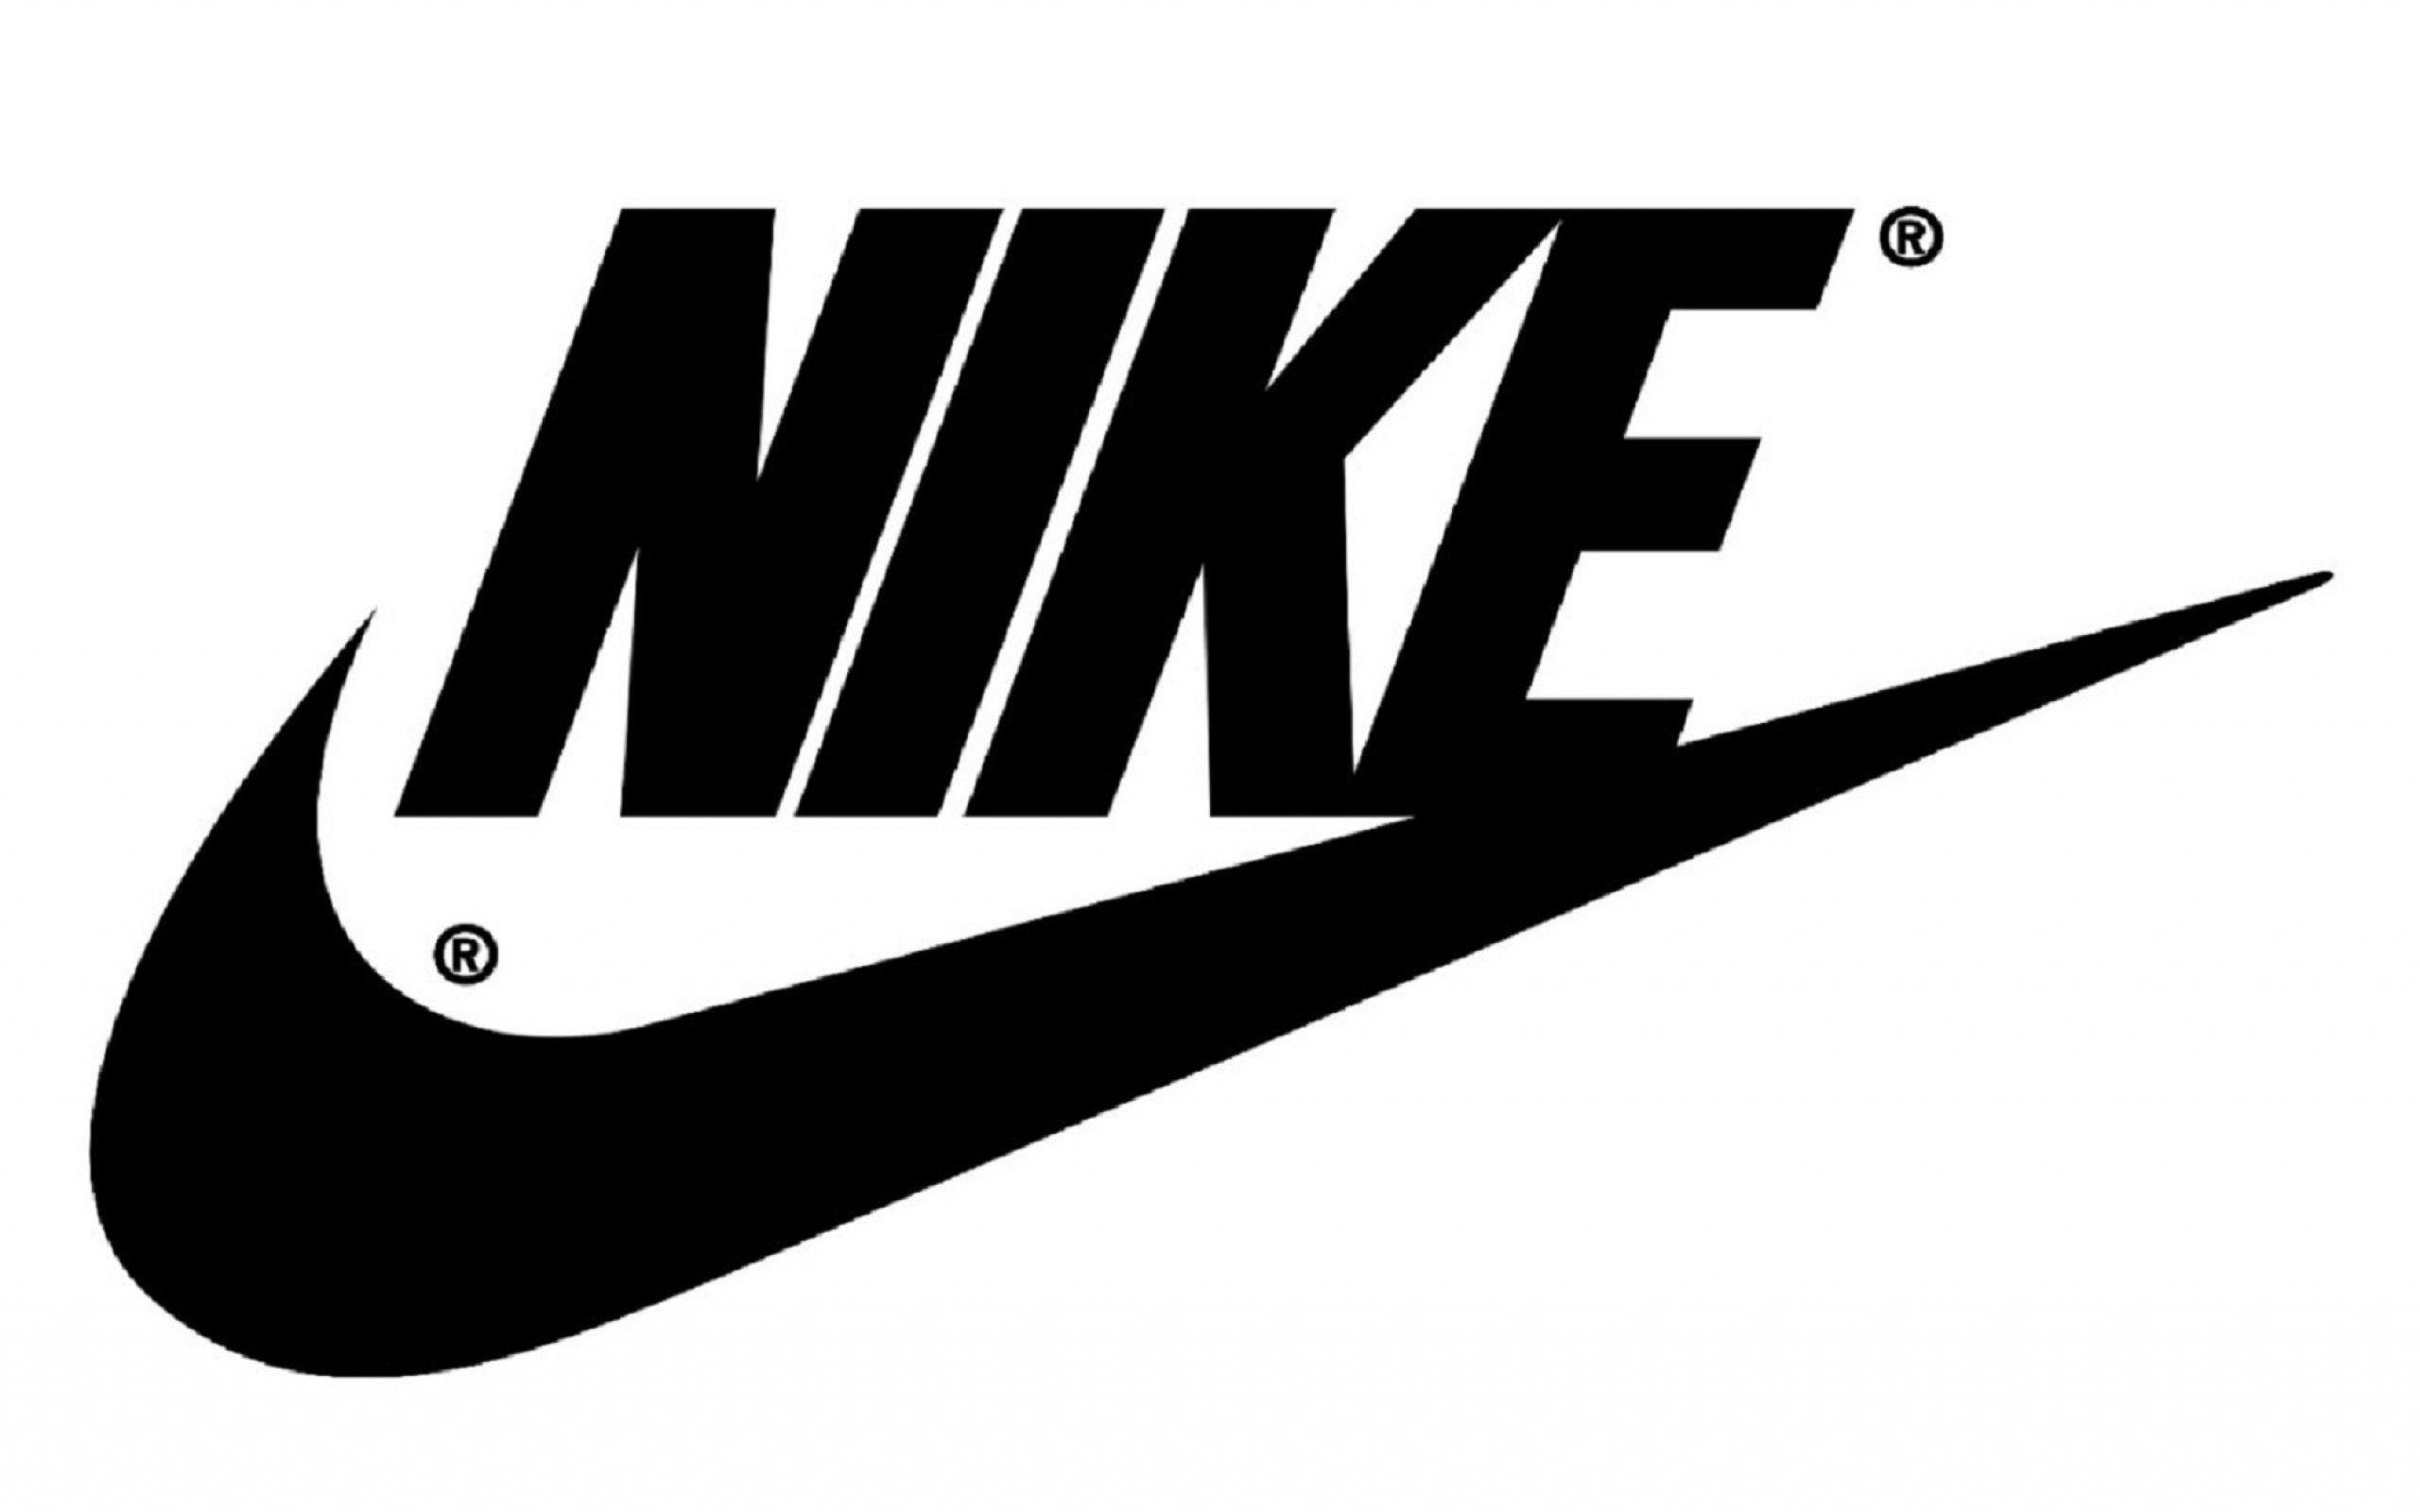 Cool Nike Swoosh Logo - Precise Continental The Story of the Designer who made Nike's Swoosh ...